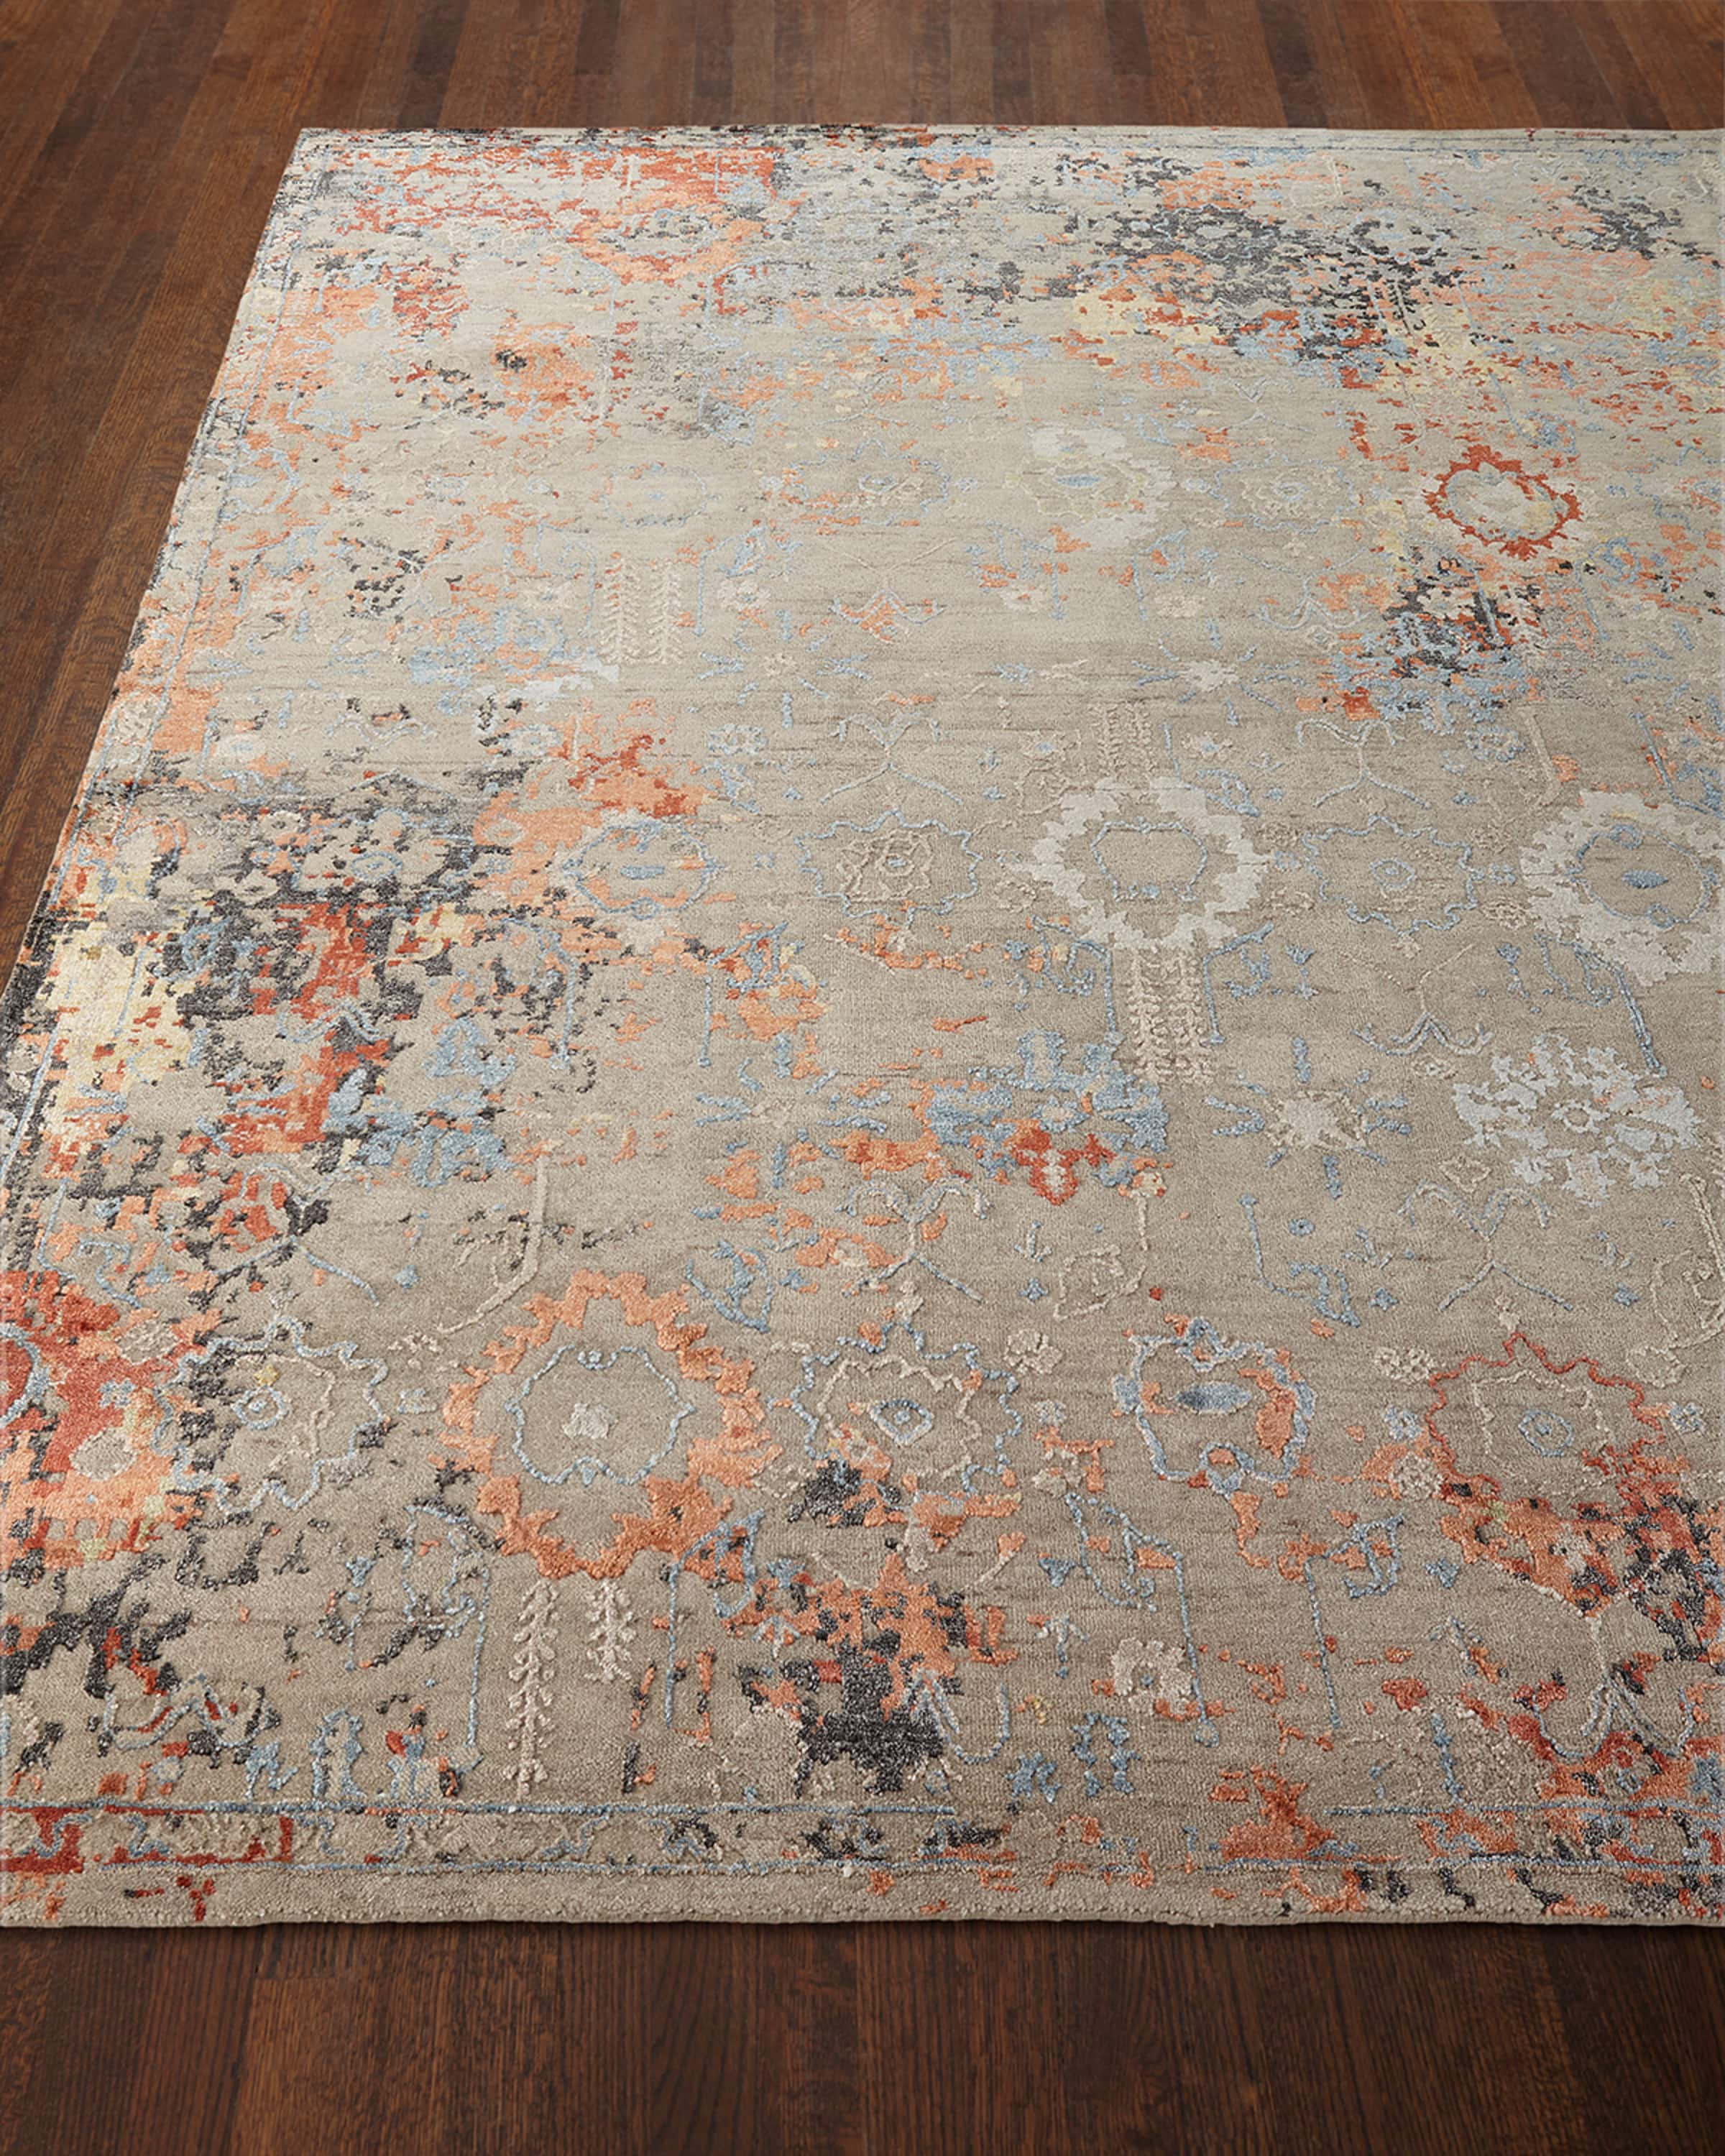 Jenzyn Hand-Knotted Rug, 12' x 15'